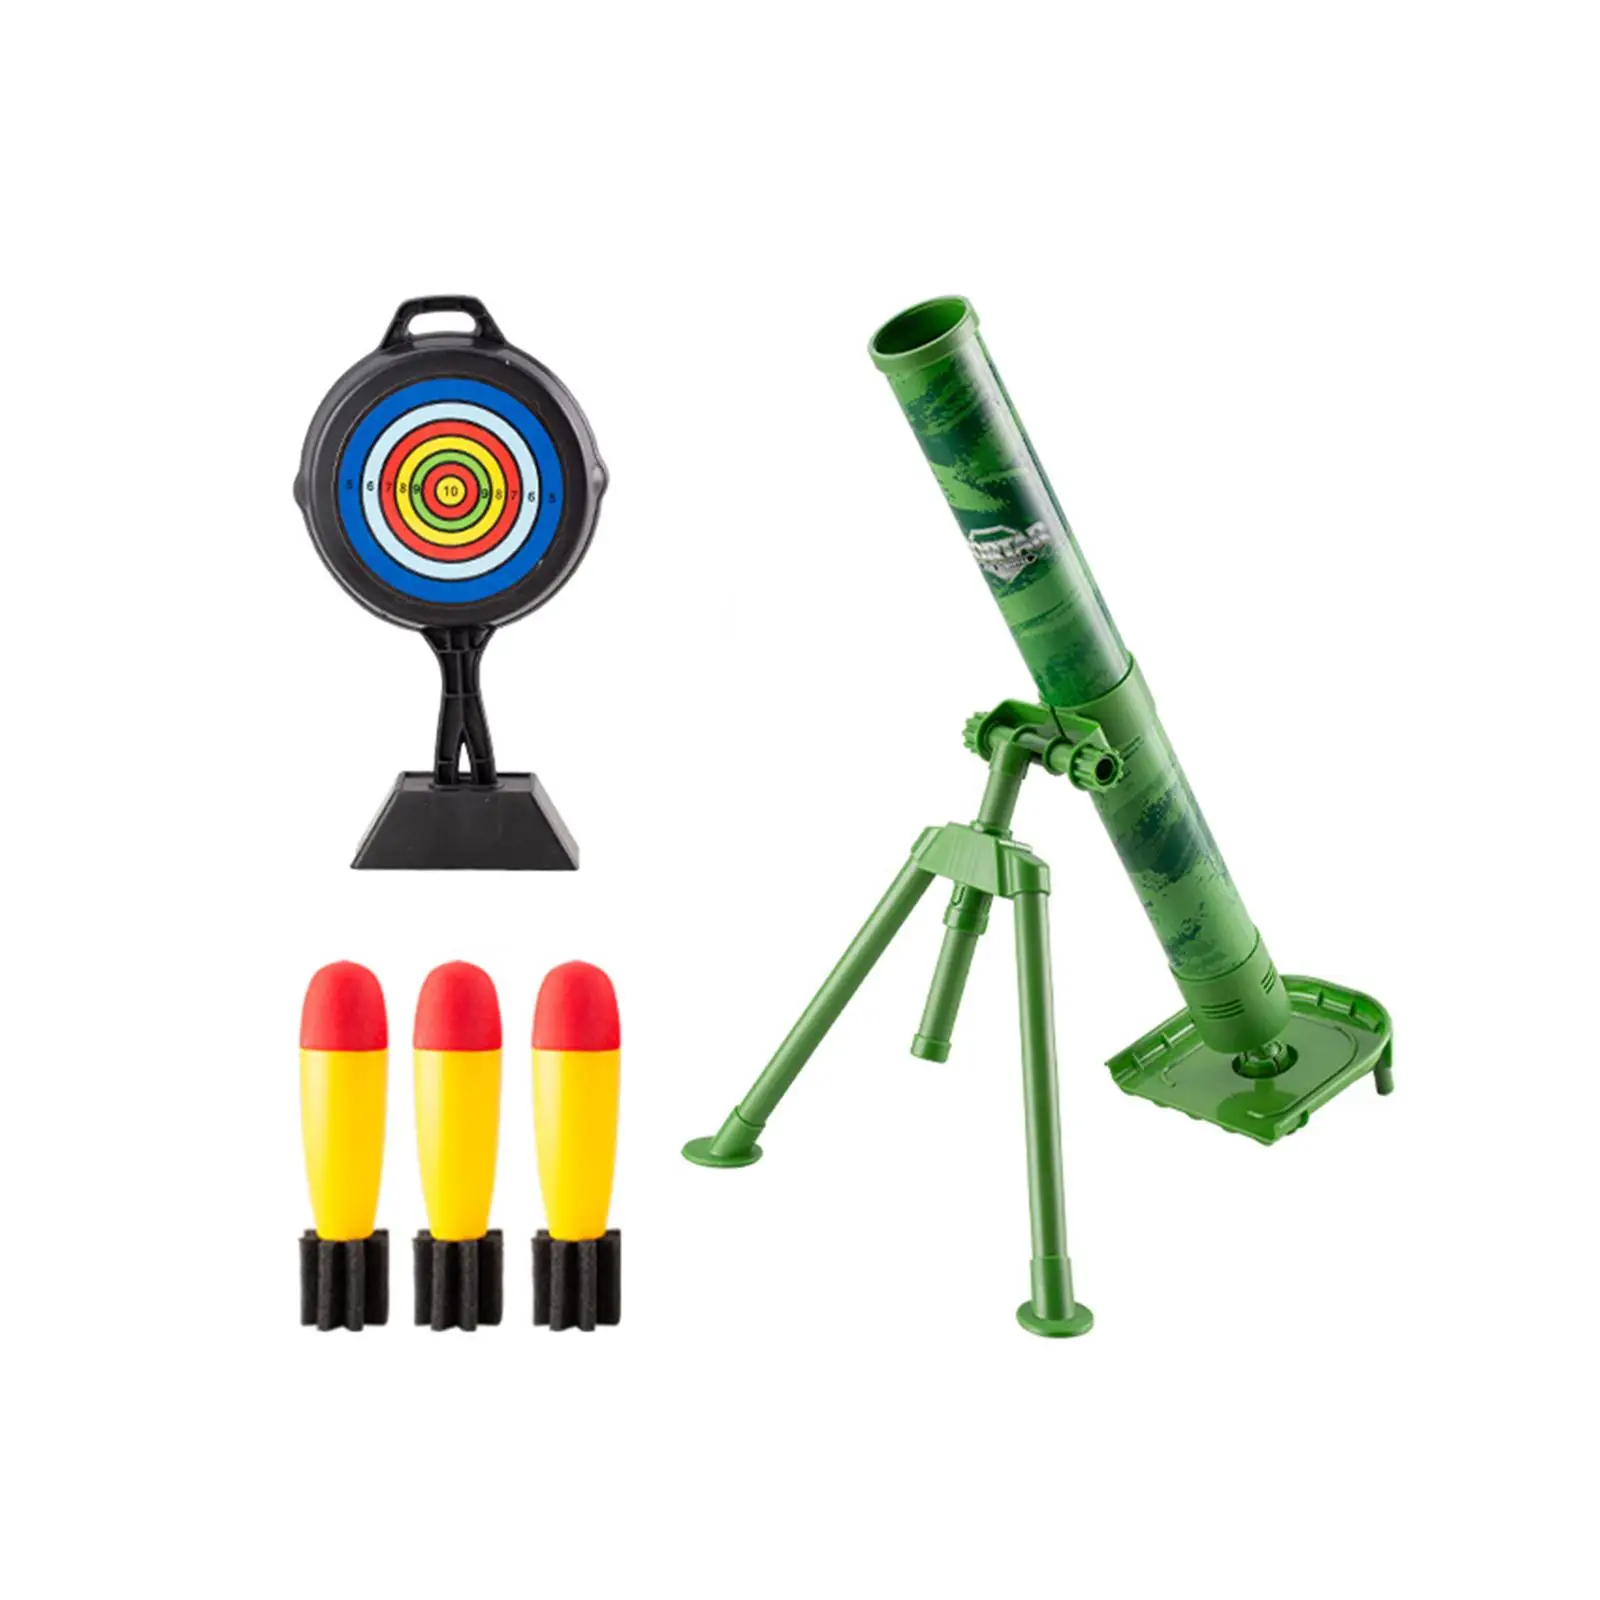 Mortar Launcher Toys with Launch Set for Boys and Girls Festival Gifts